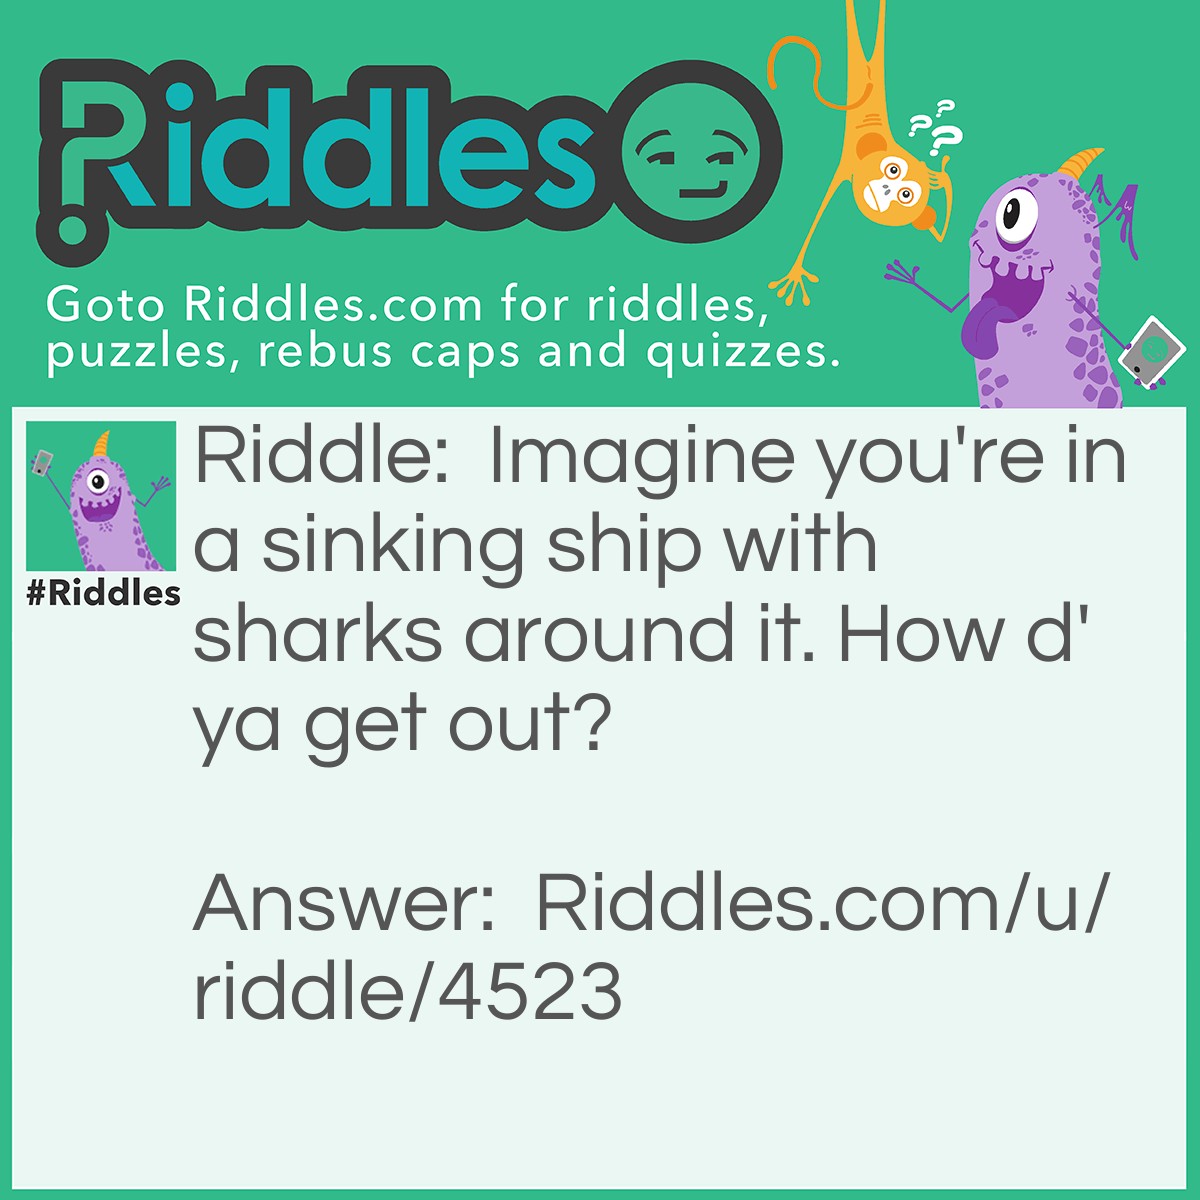 Riddle: Imagine you're in a sinking ship with sharks around it. How d'ya get out? Answer: Stop imagining.